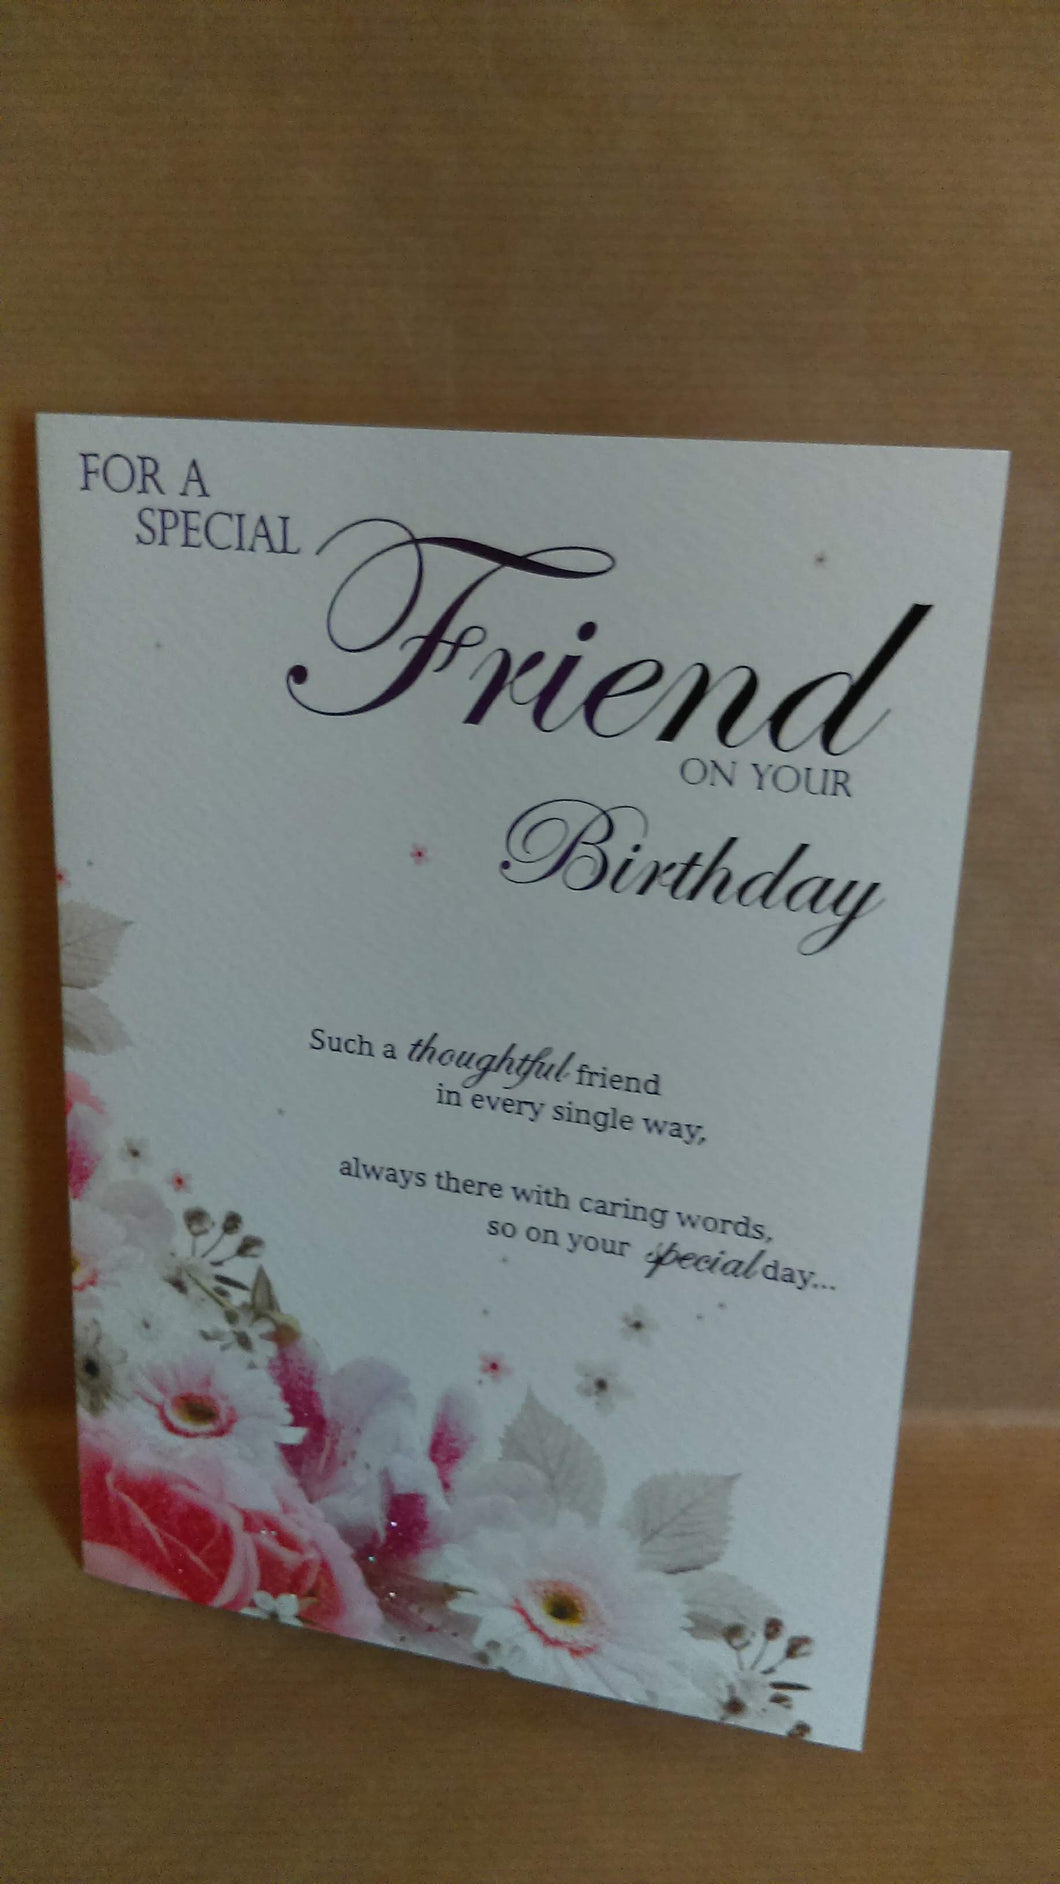 Friend Birthday For a Special Friend on your birthday